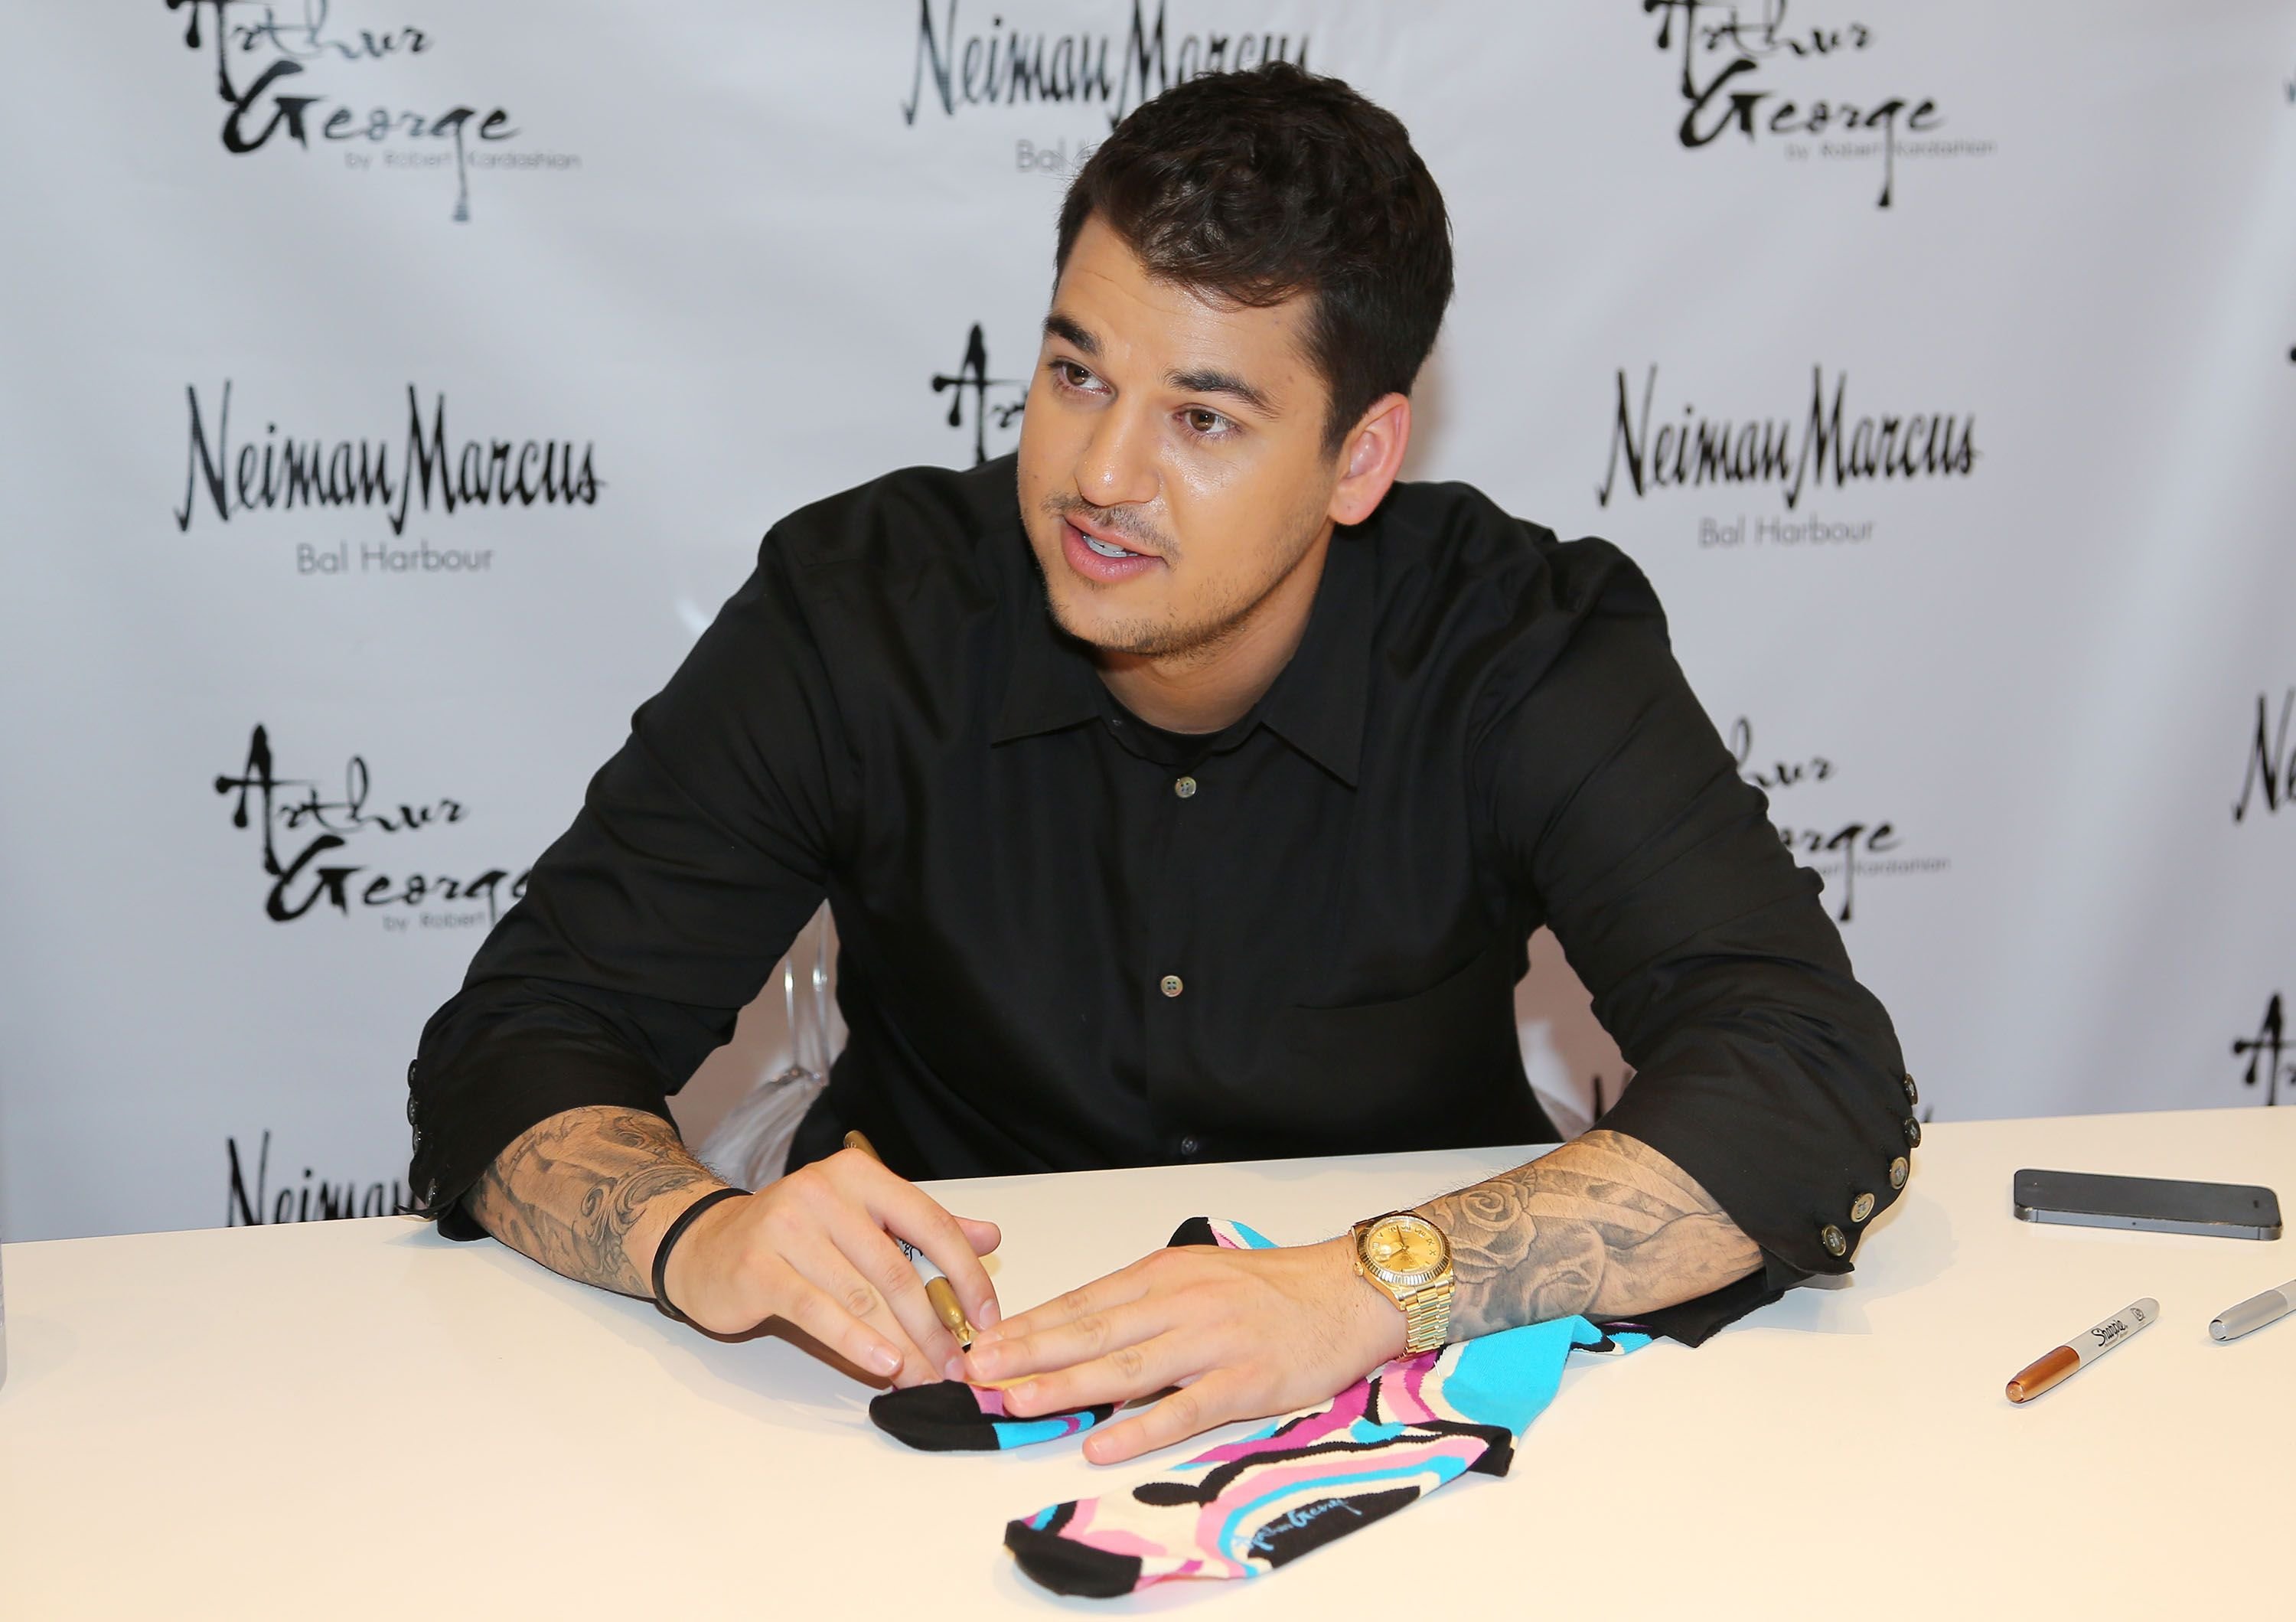 Reality star Rob Kardashian during his 2012 presentation of his Arthur George Socks Collection at the Neiman Marcus Bal Harbour in Miami Beach, Florida. | Photo: Getty Images